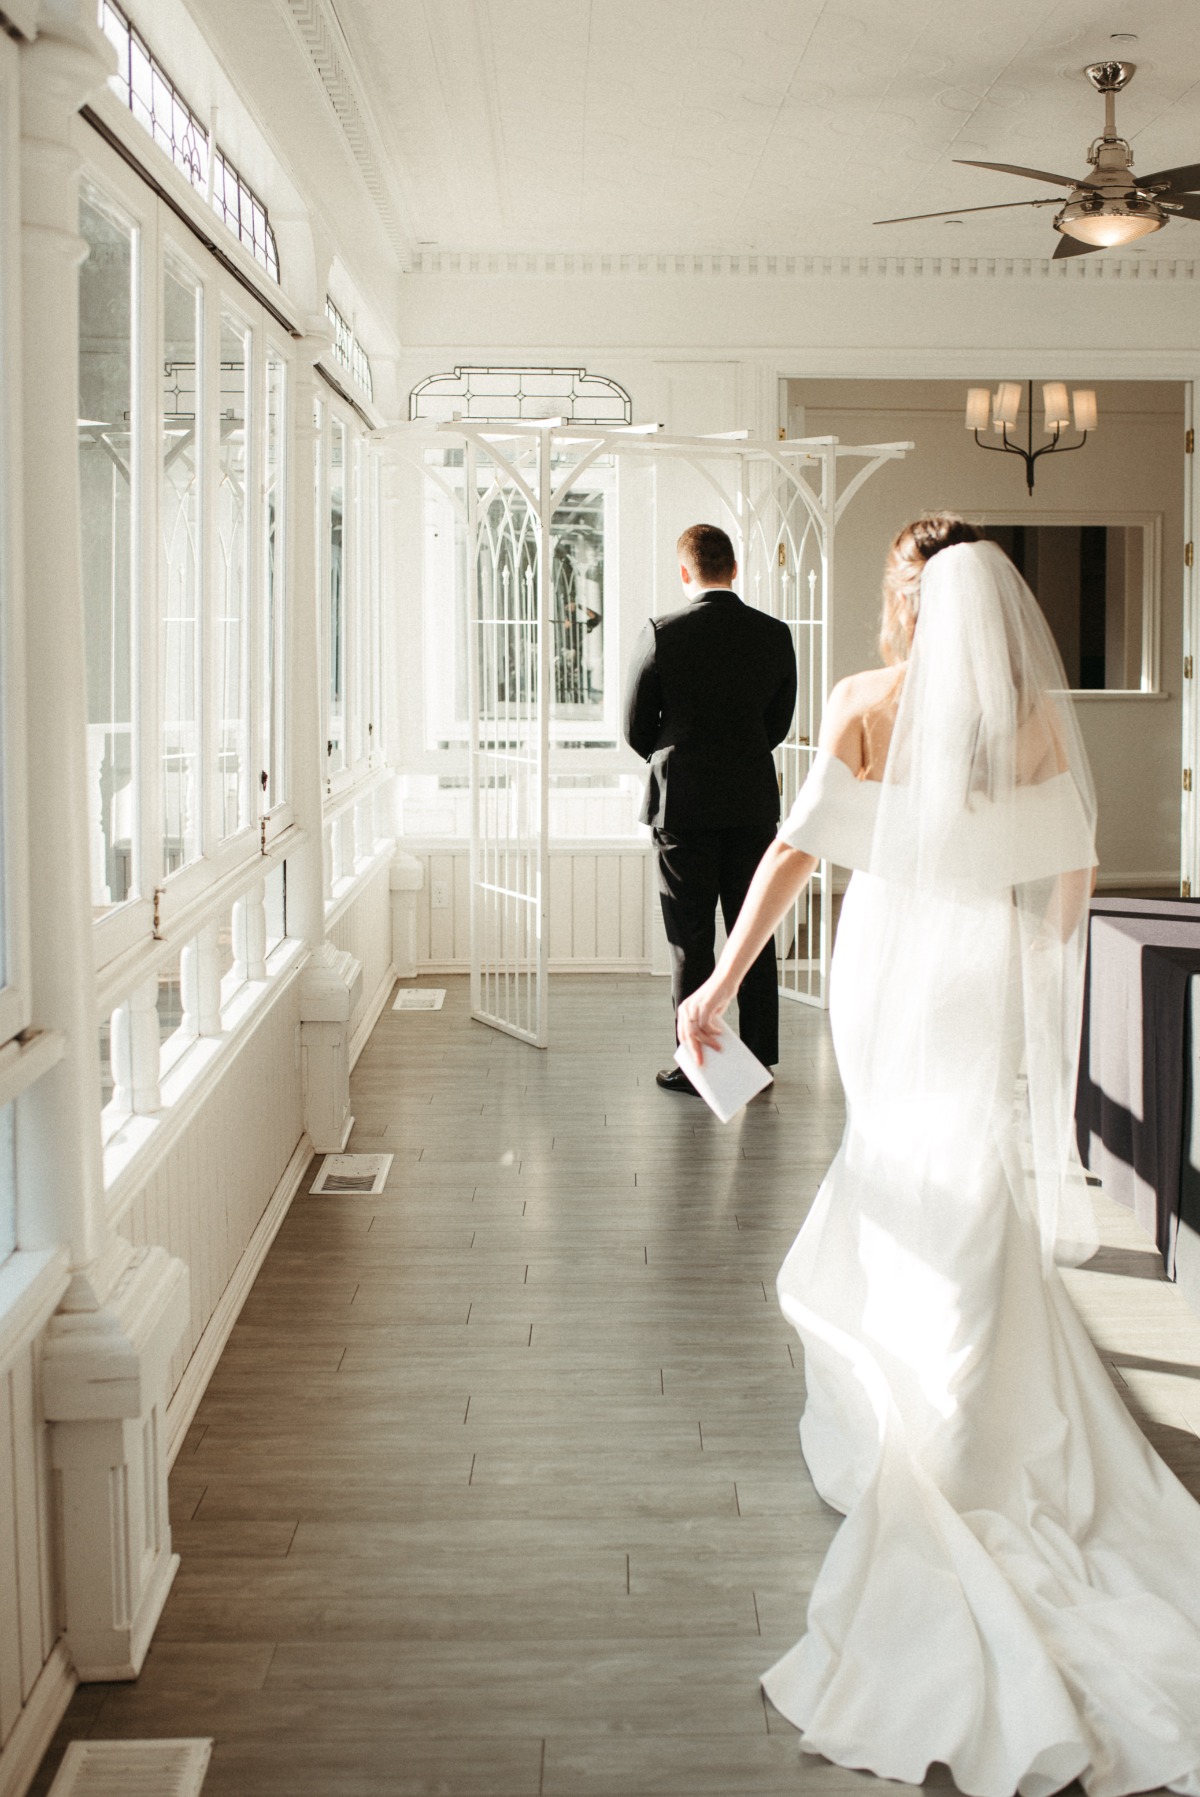 This Wedding At A California Mansion Only Cost 13K!